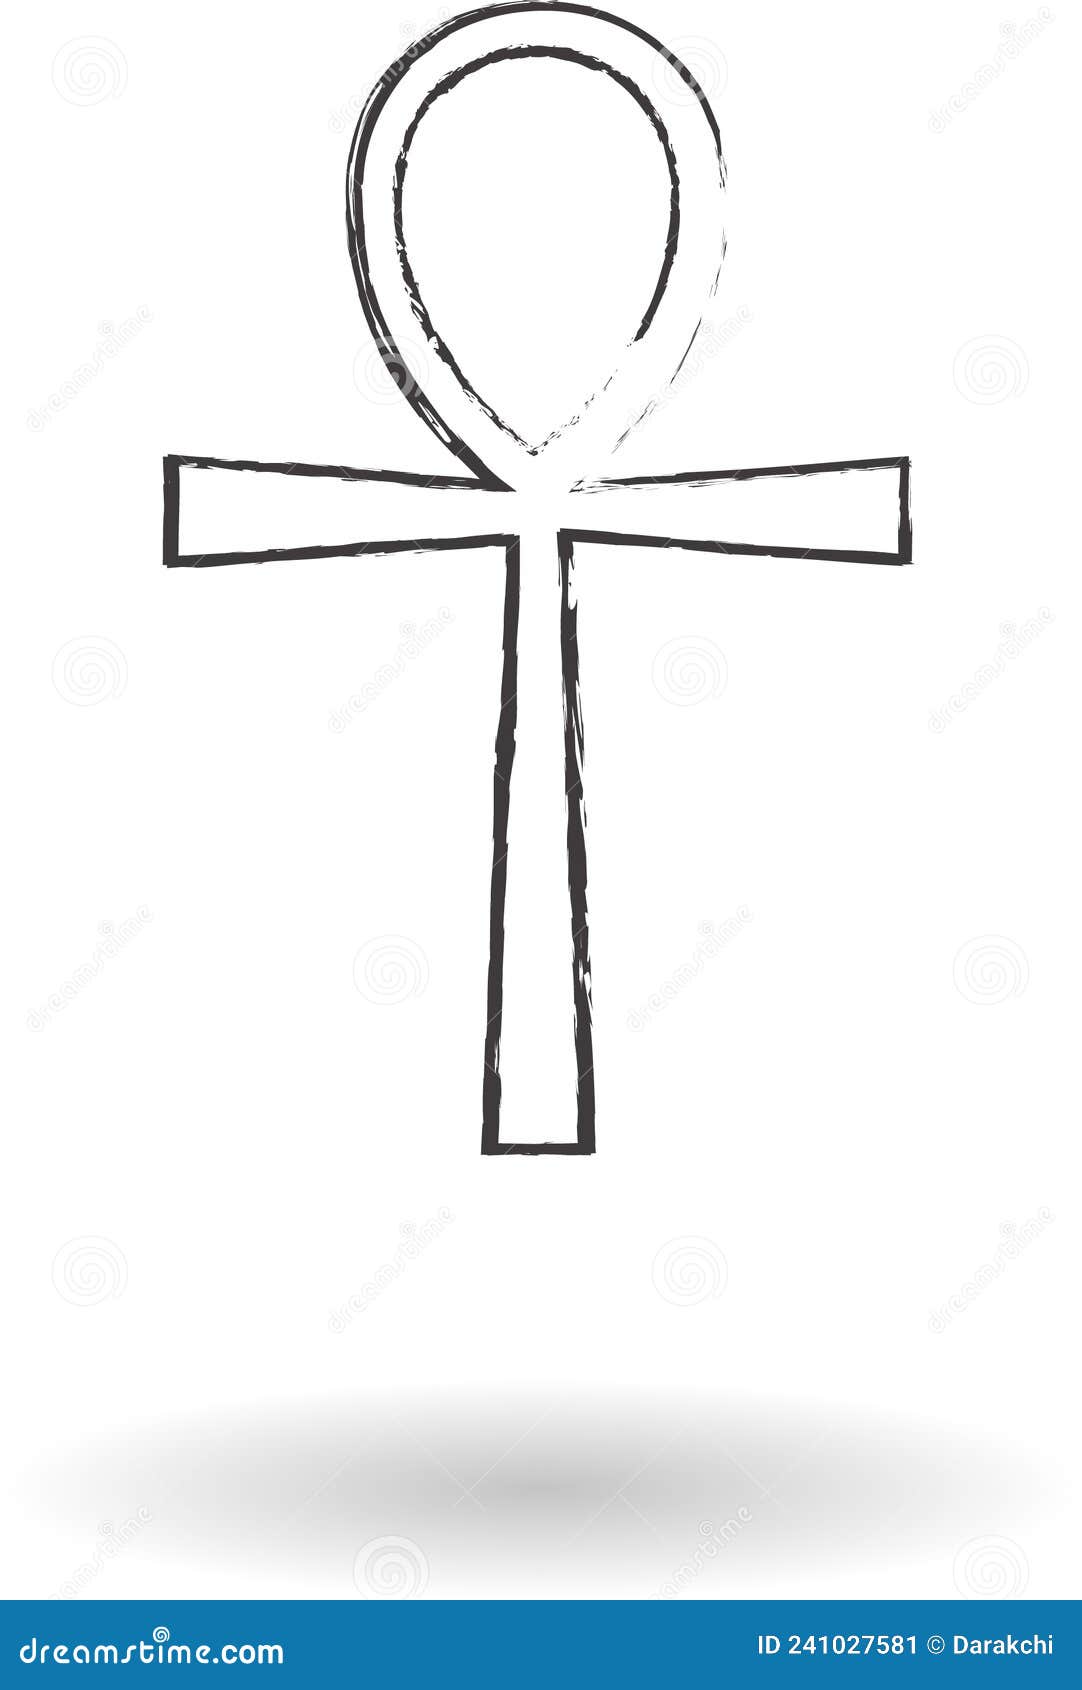 Ankh cross pencil drawing stock vector. Illustration of believe 241027581